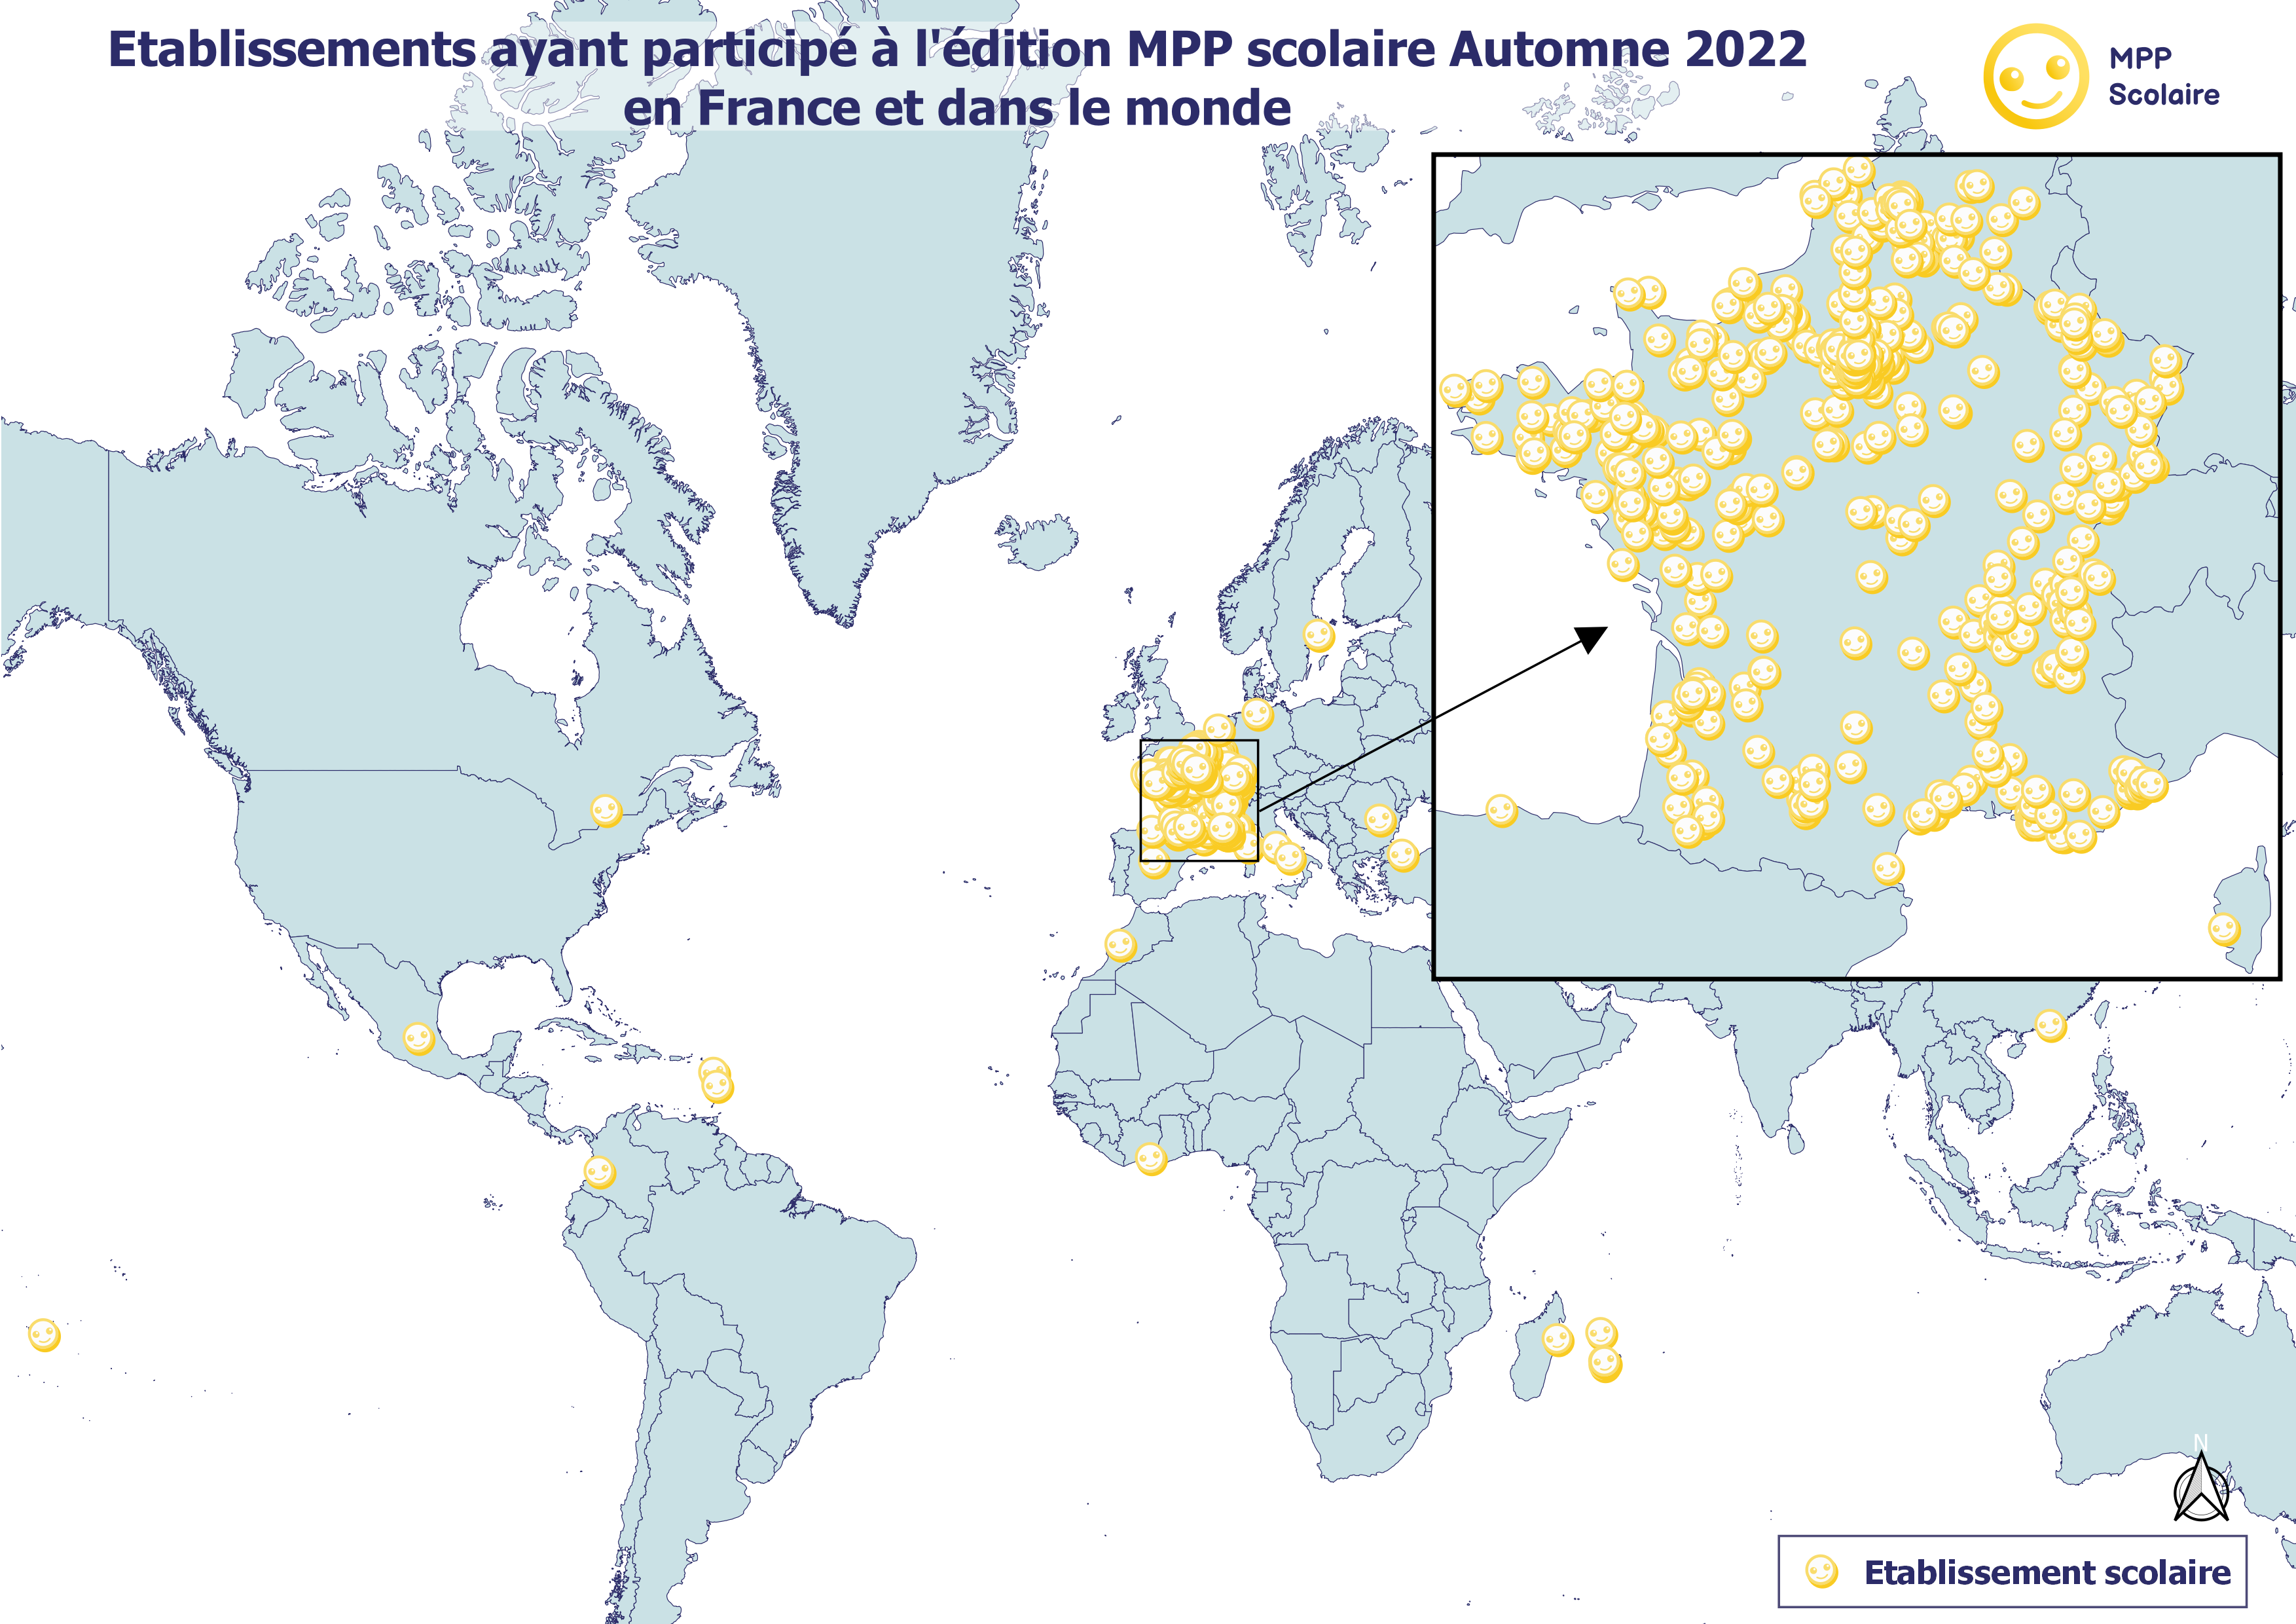 map of the world where students playing MPP are located